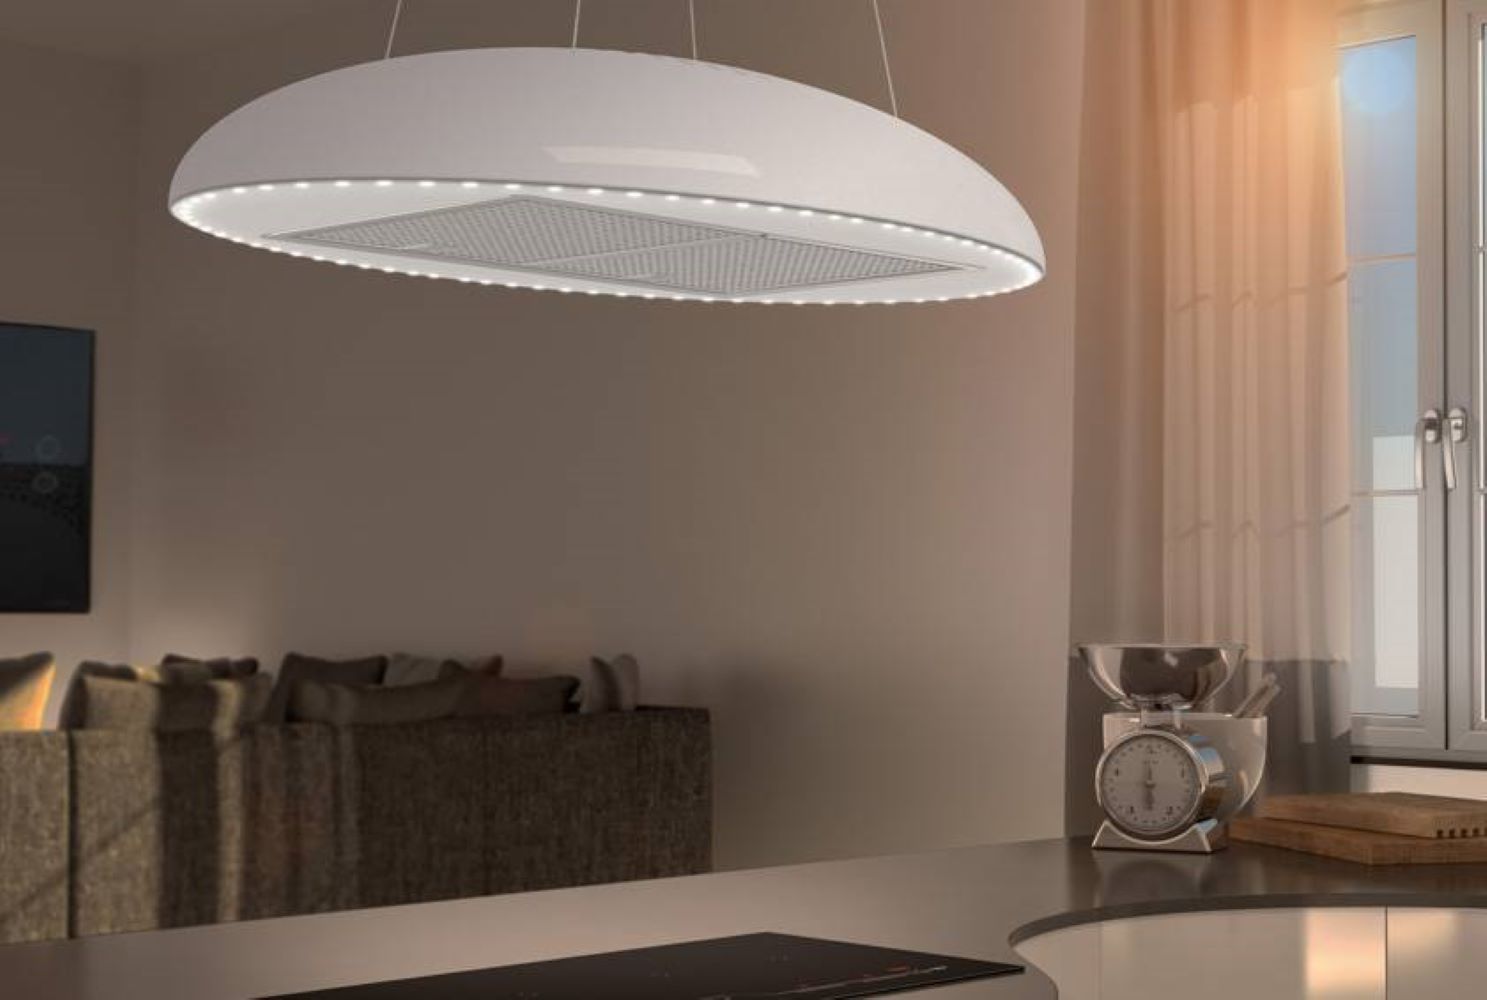 Airforce Eclipse 90cm Island Lamp Hood with Integra System - Pearl White - Devine Distribution Ltd